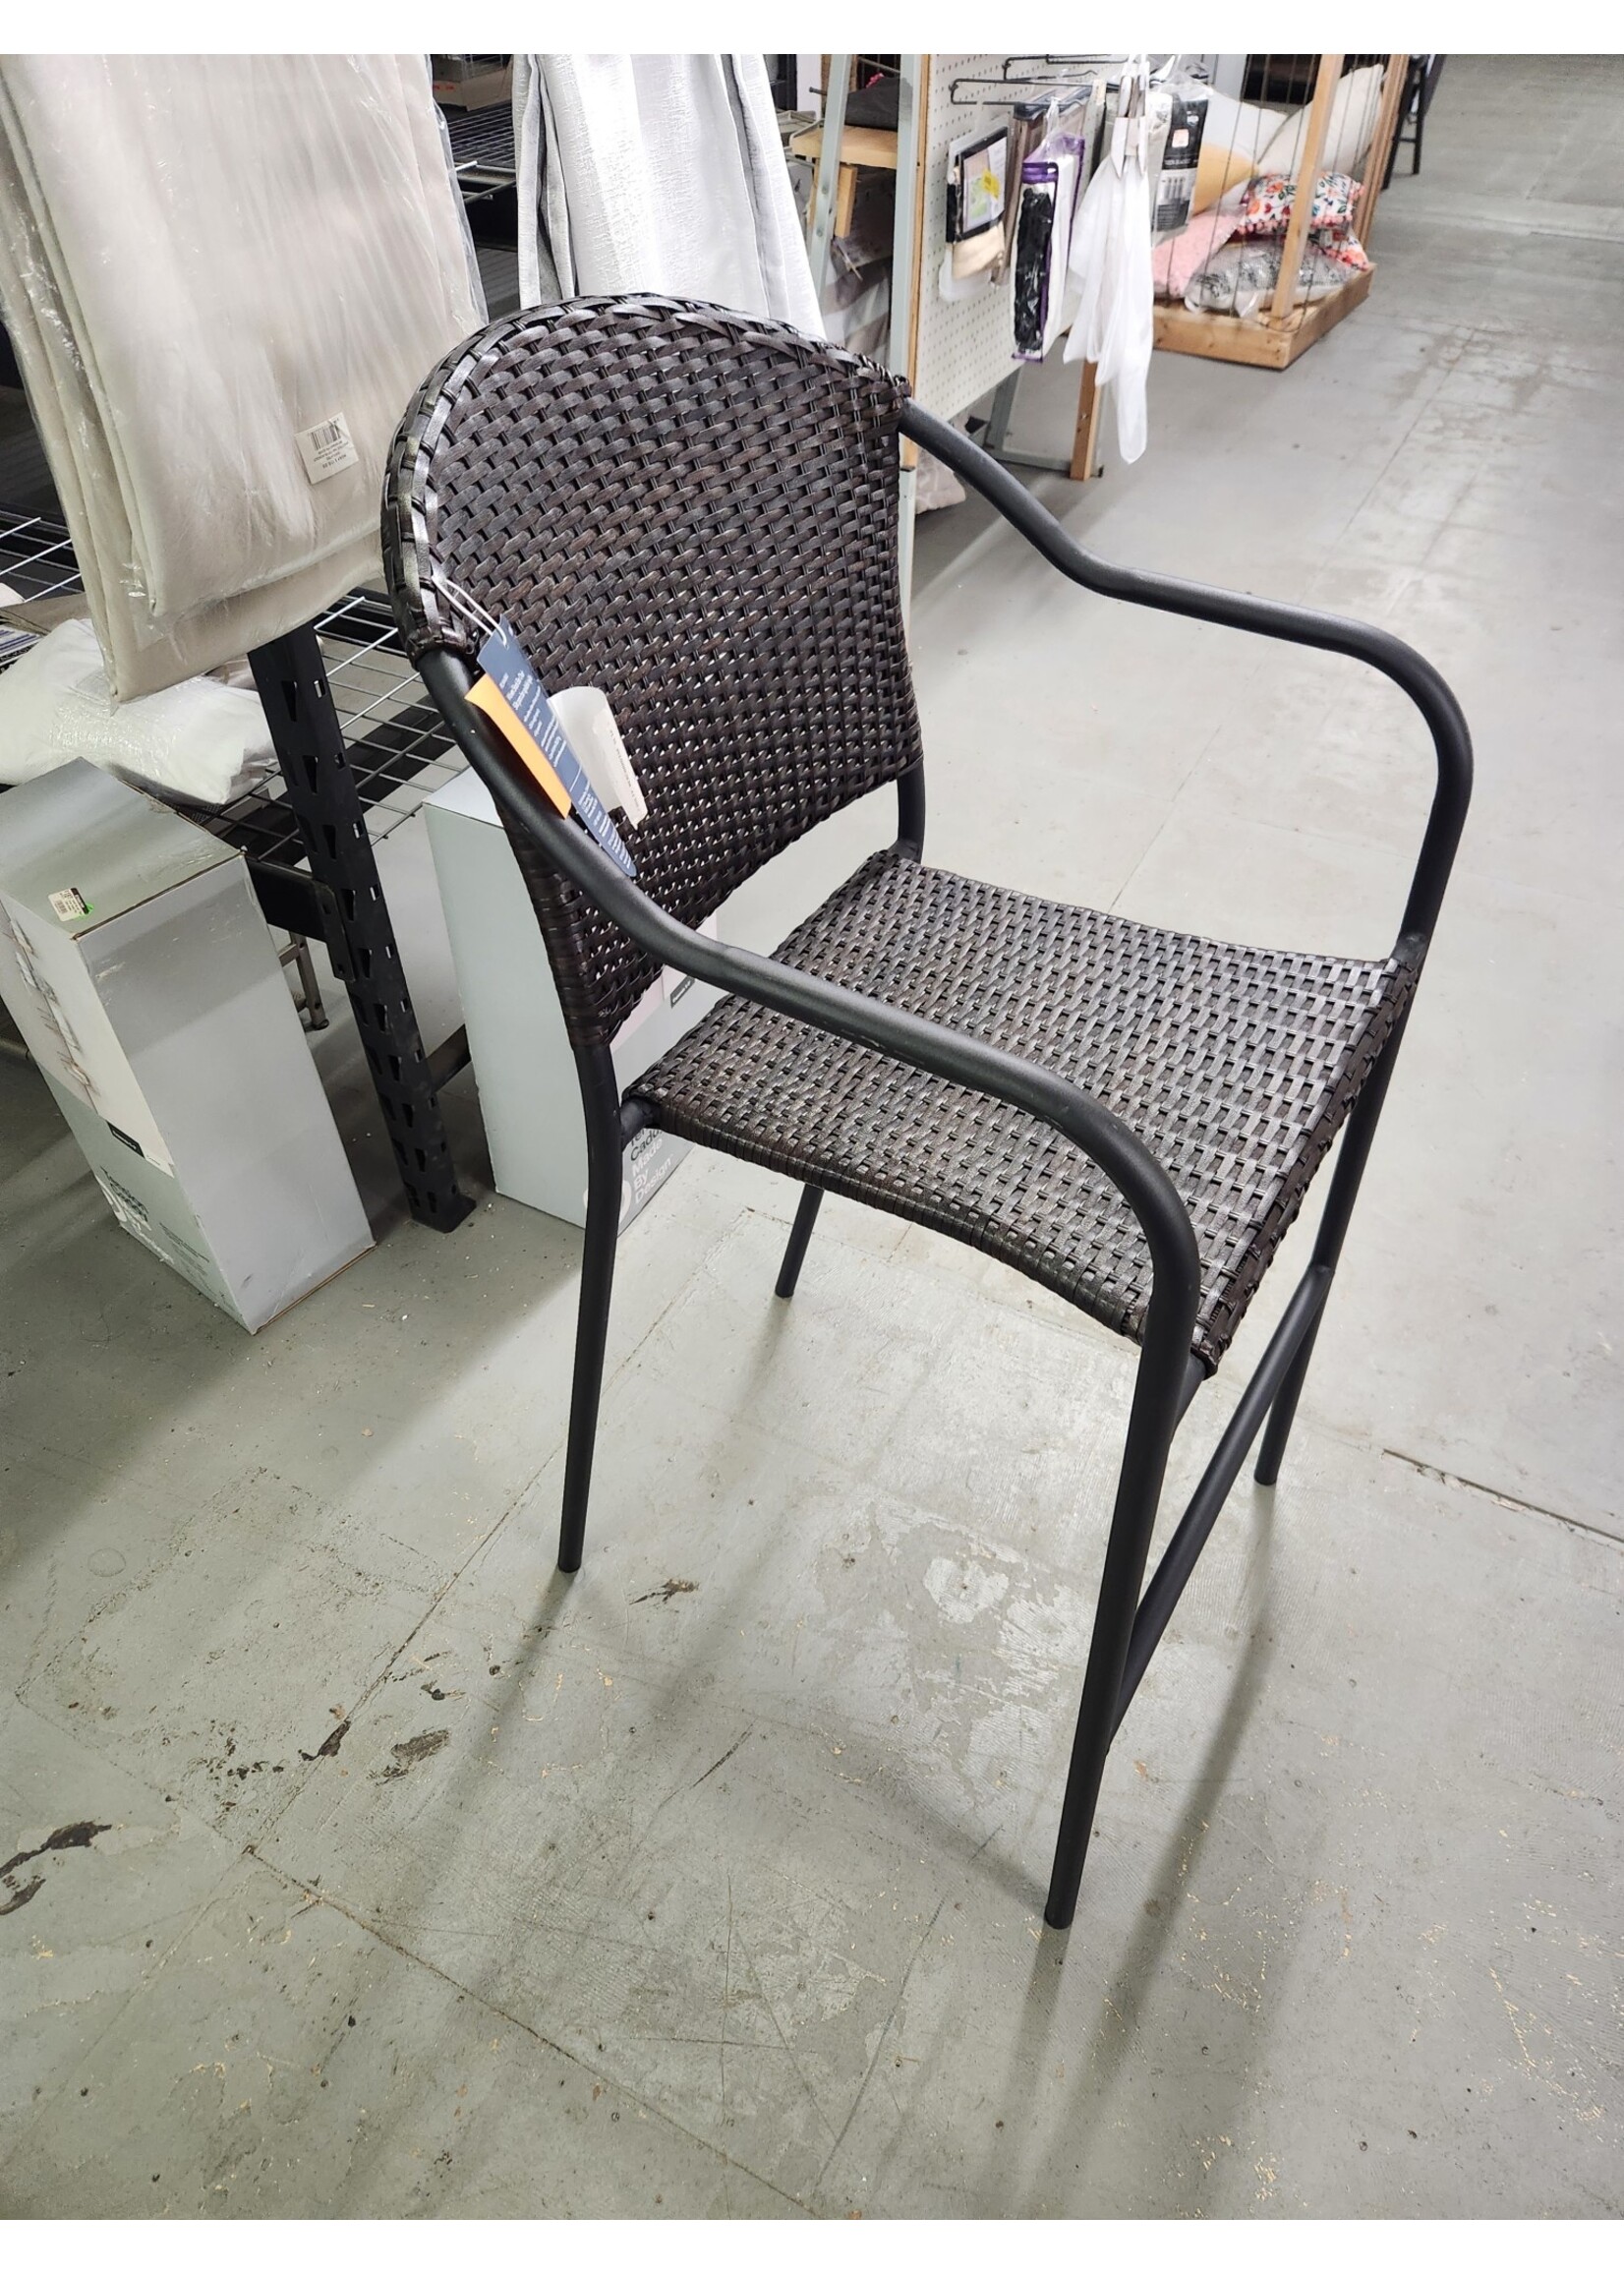 *Repaired Wicker 29" Seat Height Garden Treasures Pelham bay Wicker Stackable Matte Black Steel Frame Stationary Bar Stool Chair with Woven Seat 300lb